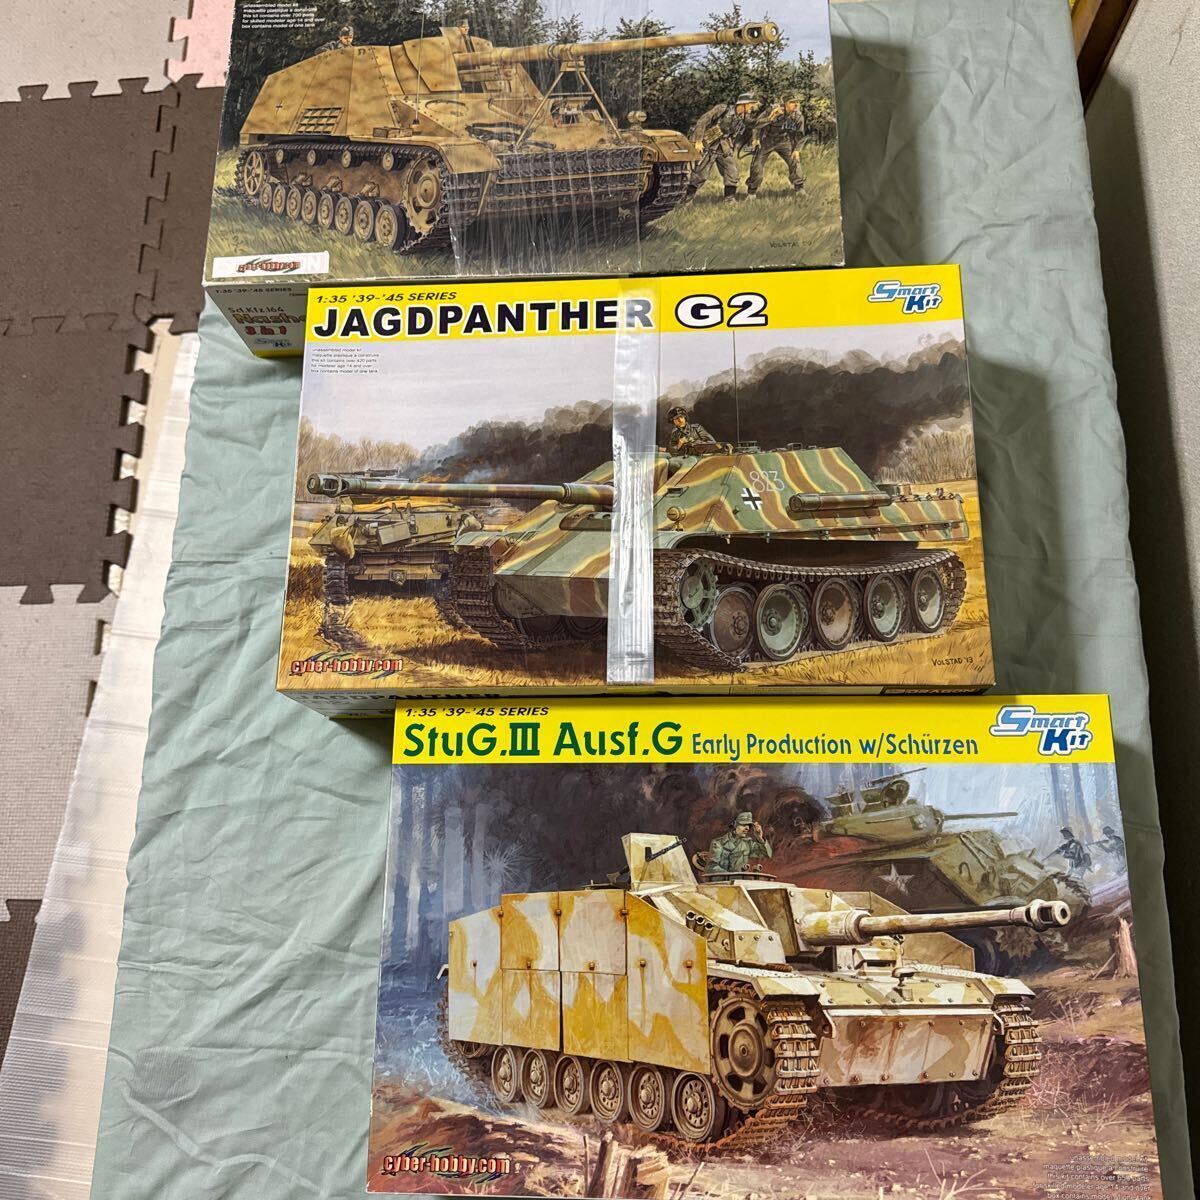  Dragon Germany army nurse horn etc. self-propelled artillery 1|35 not yet constructed 3 piece set 